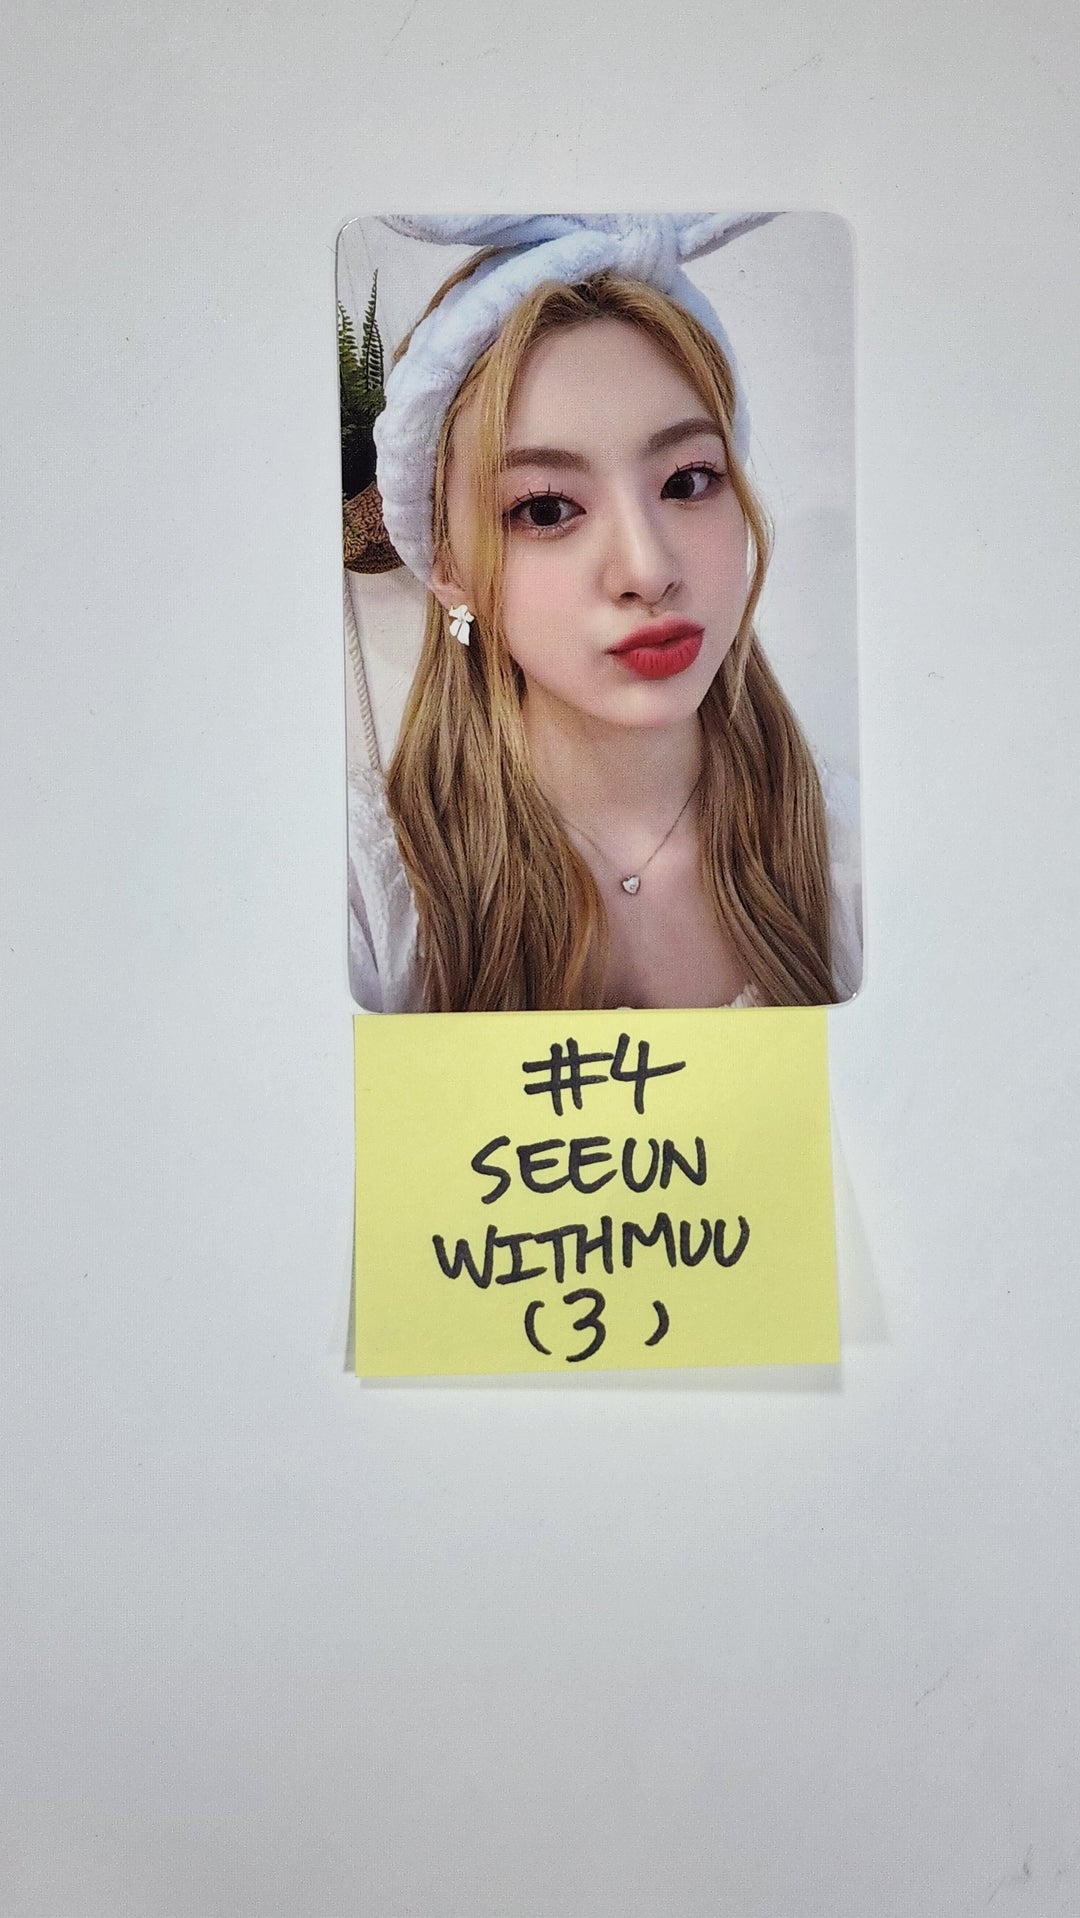 StayC 'WE NEED LOVE' - Withmuu Fansign Event Photocard Round 2